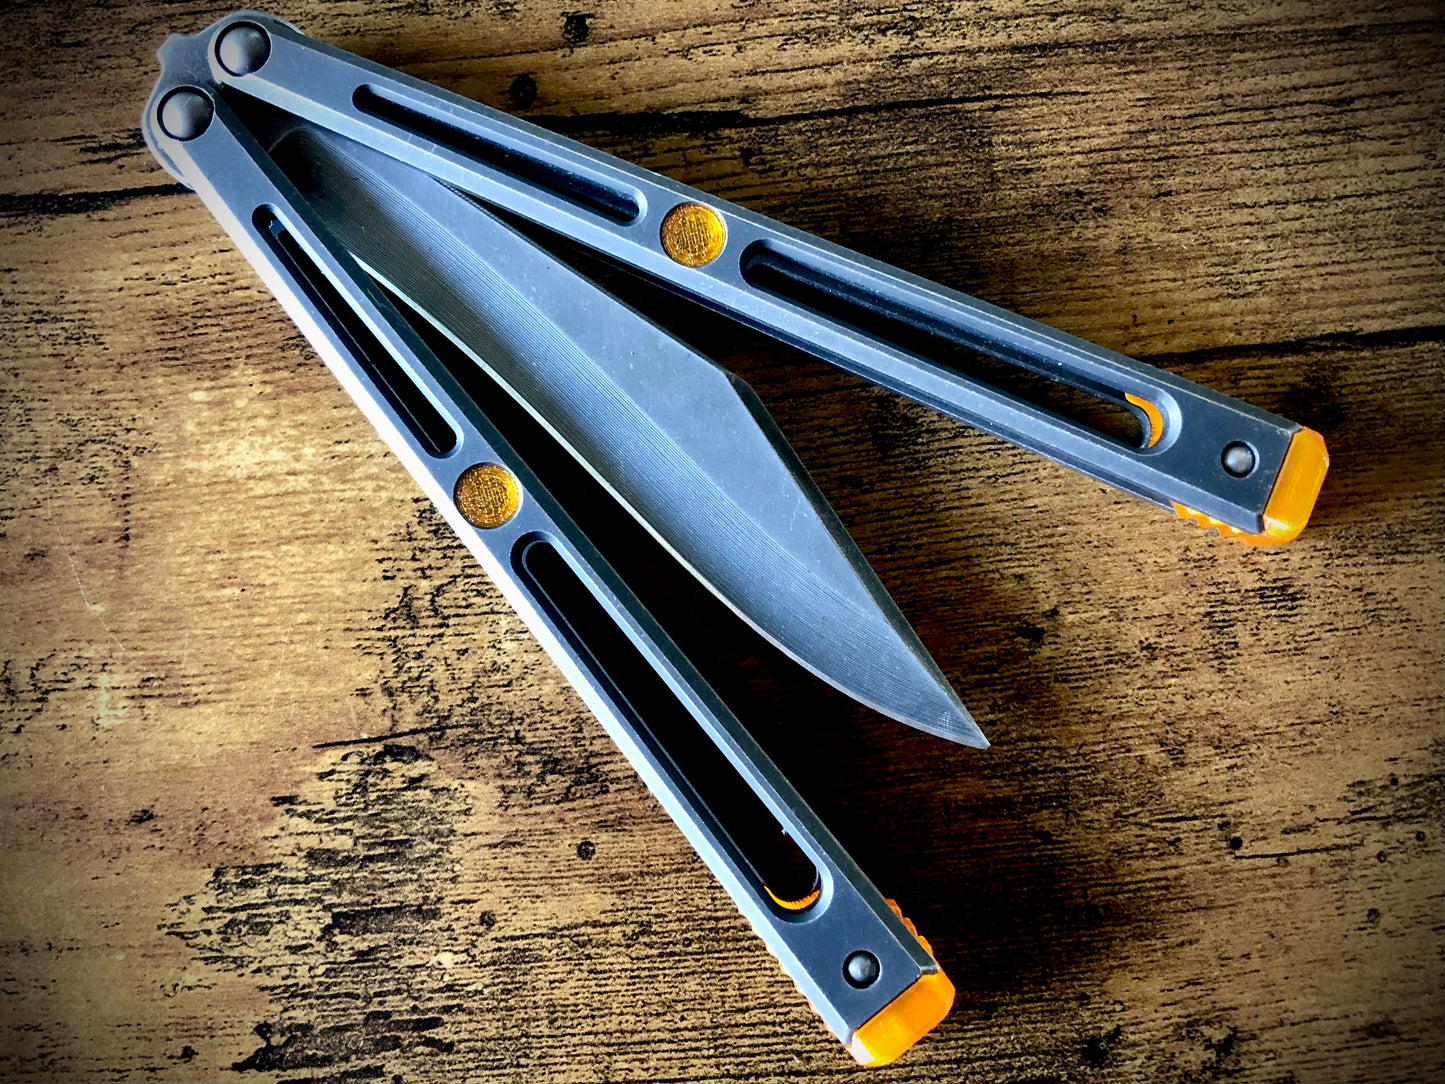 Extend and protect your handles with these Zippy spacers, custom-made for the Goose balisong (designed by Arthur Goins and machined by JK Design). The spacers are made from a shatter-proof polyurethane and protect your handles from drops while adding length. The spacers also feature positive sawtooth jimping and adjustable balance.